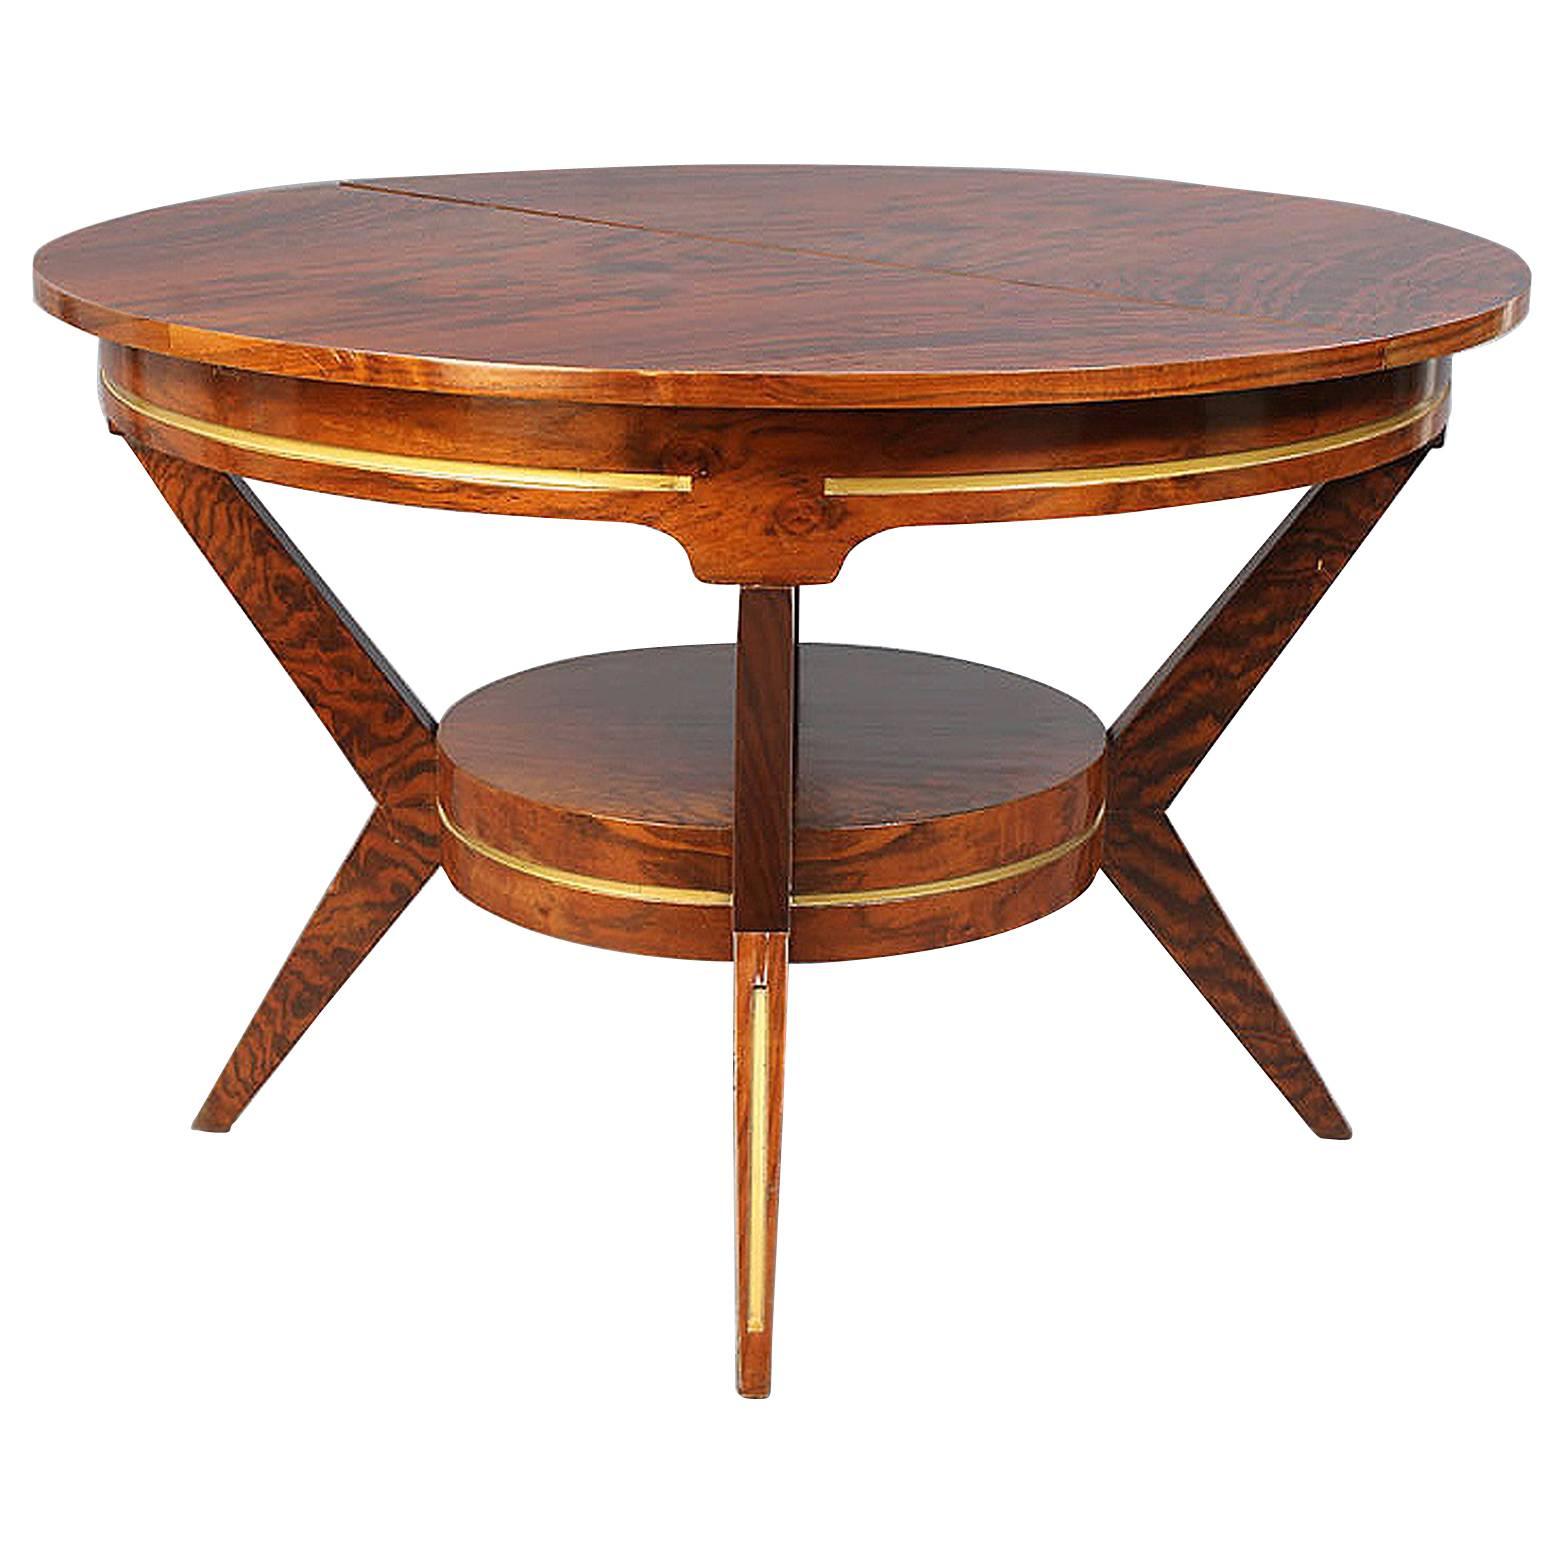 Walnut Mid-Century Modern Dining Table with Painted Gold Details For Sale